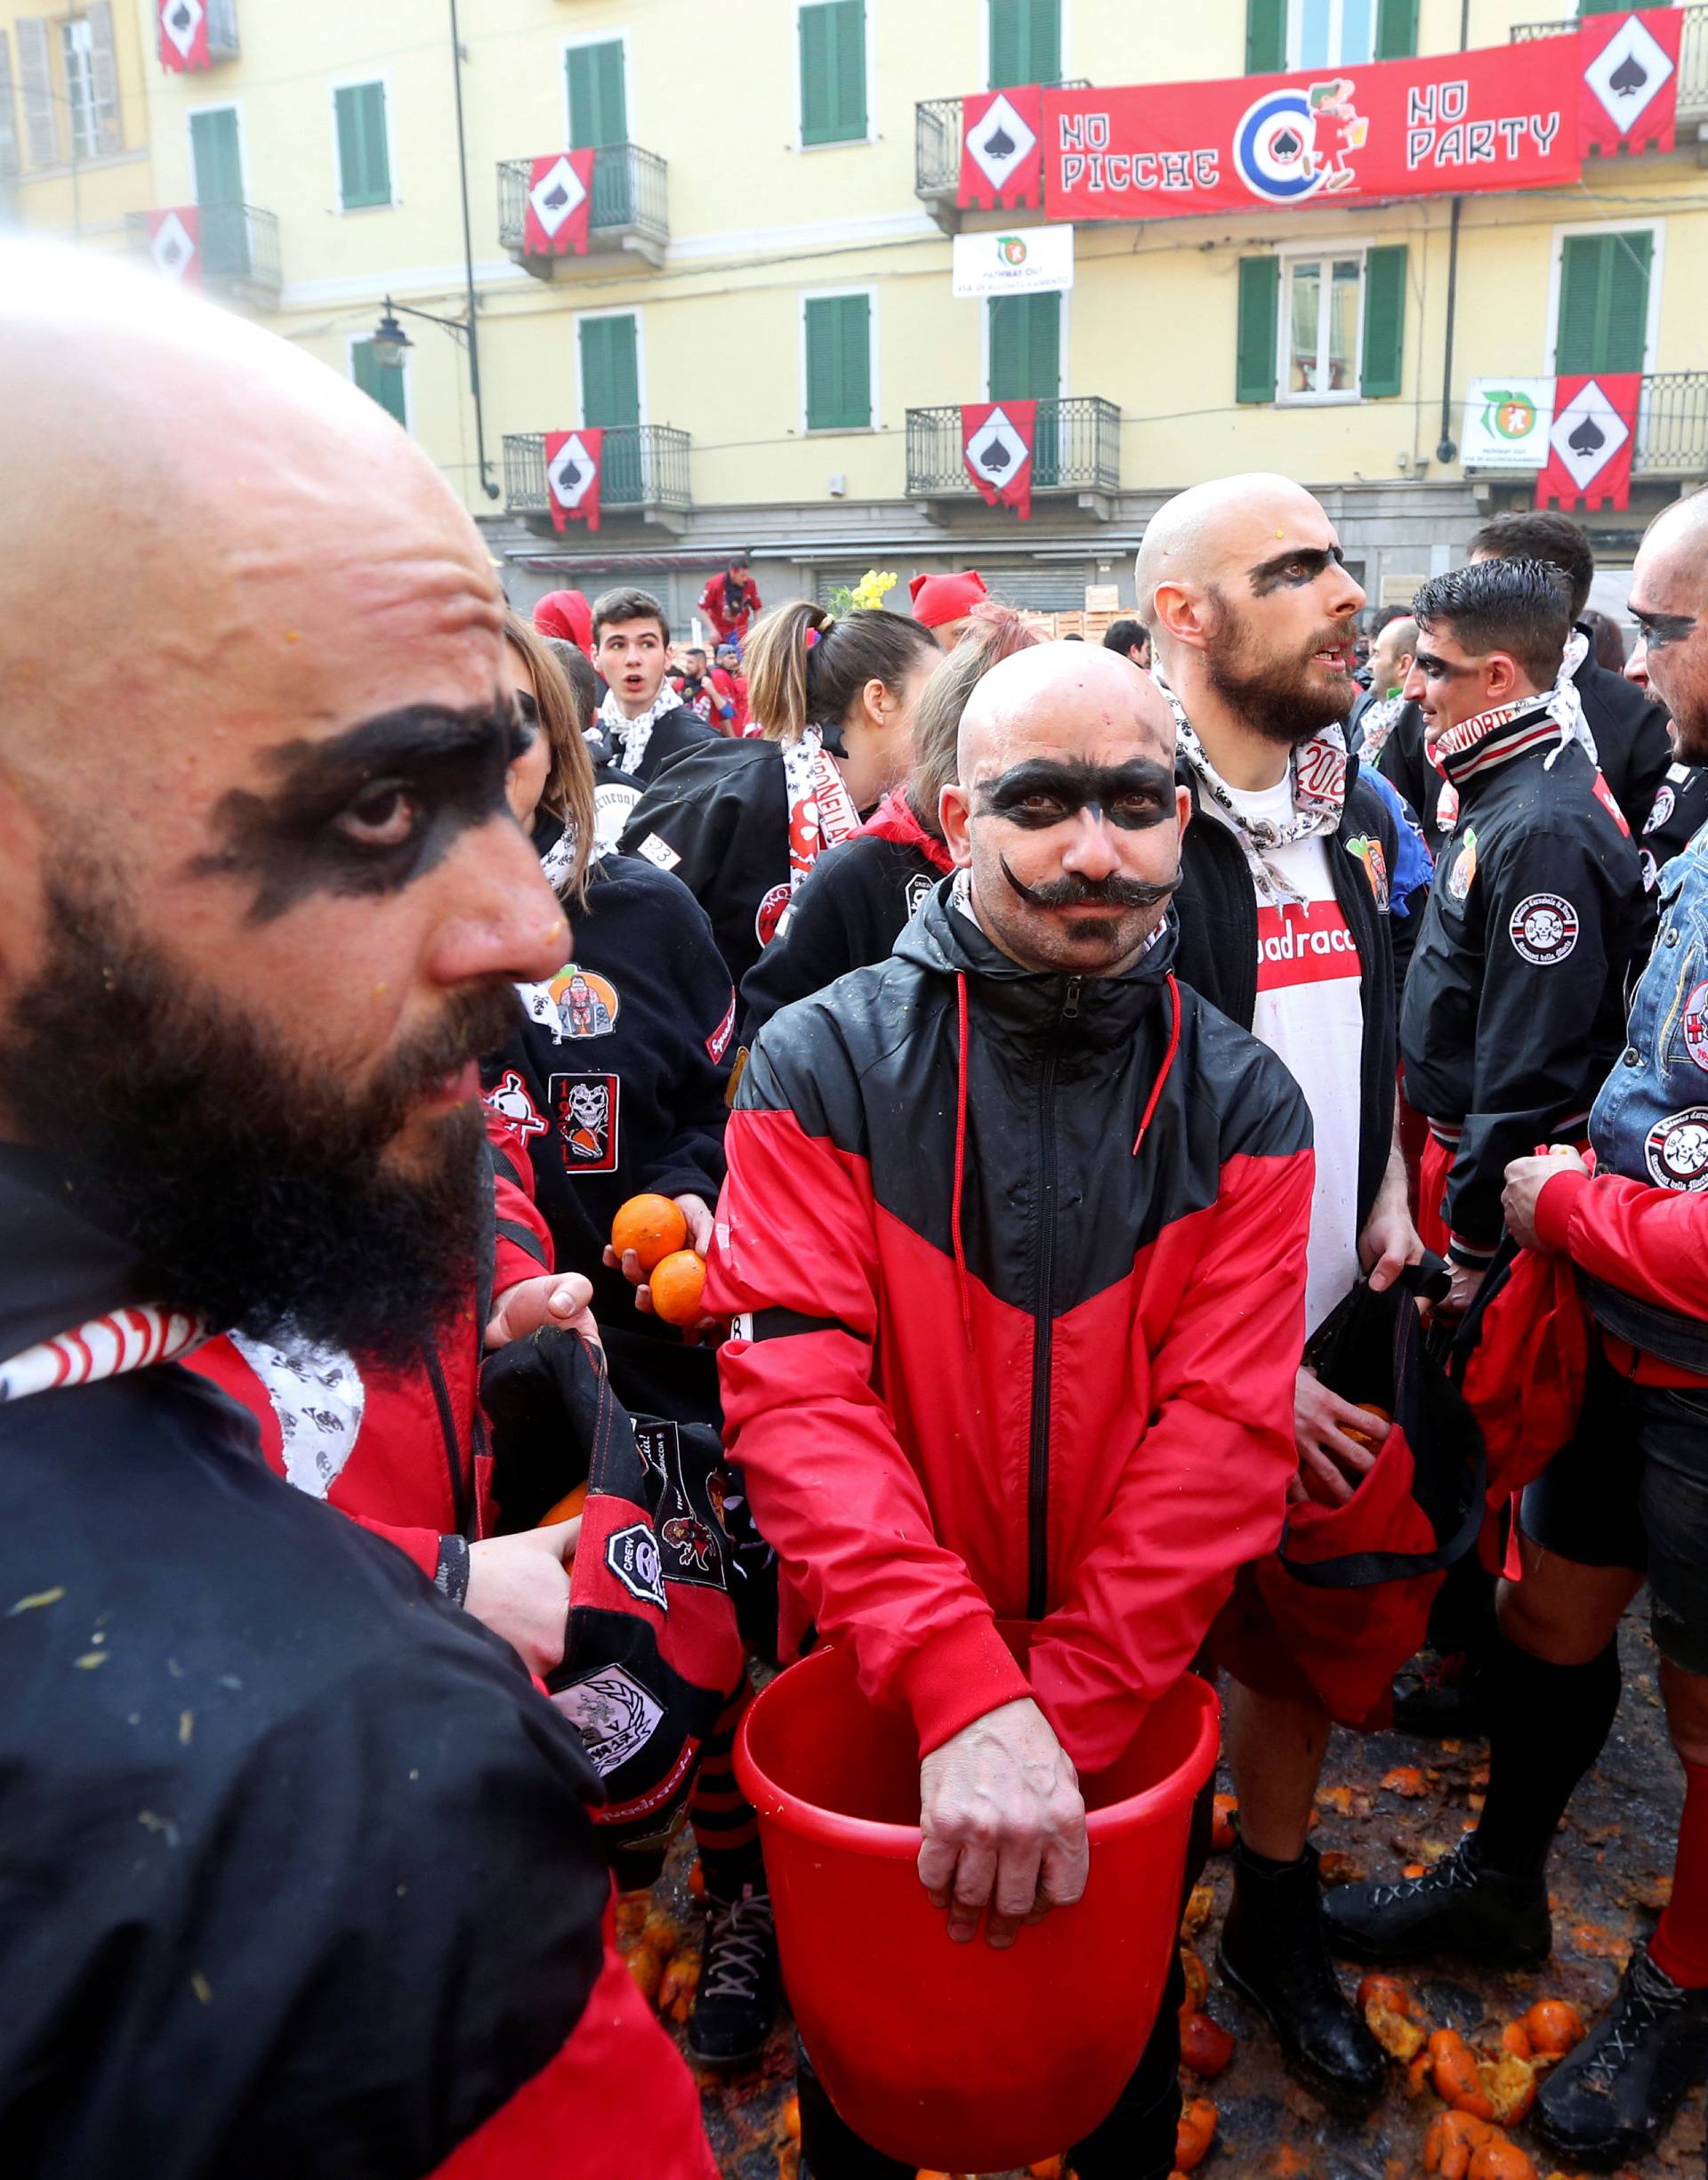 Members of a team prepare to fight with oranges during an annual carnival battle in the northern Italian town of Ivrea